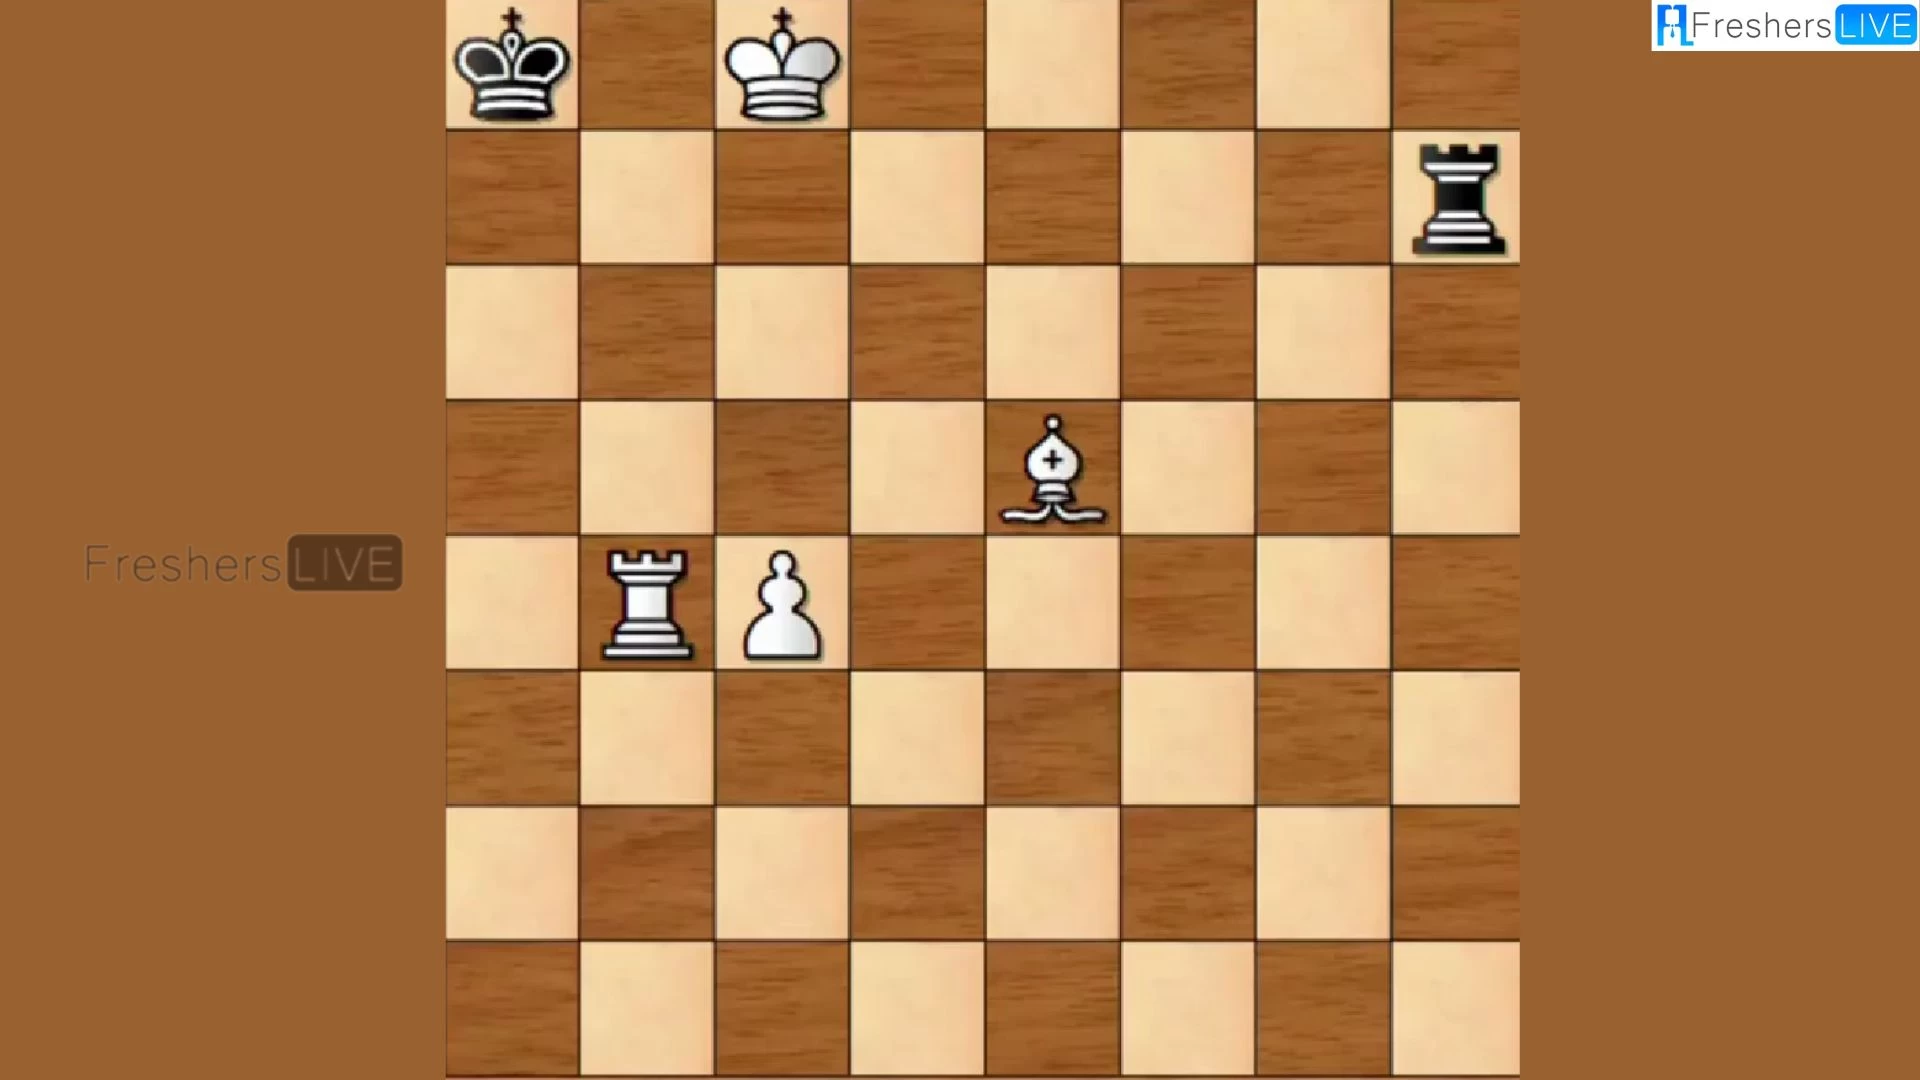 Can You Solve This Chess Puzzle in Four Moves With the White Pieces?